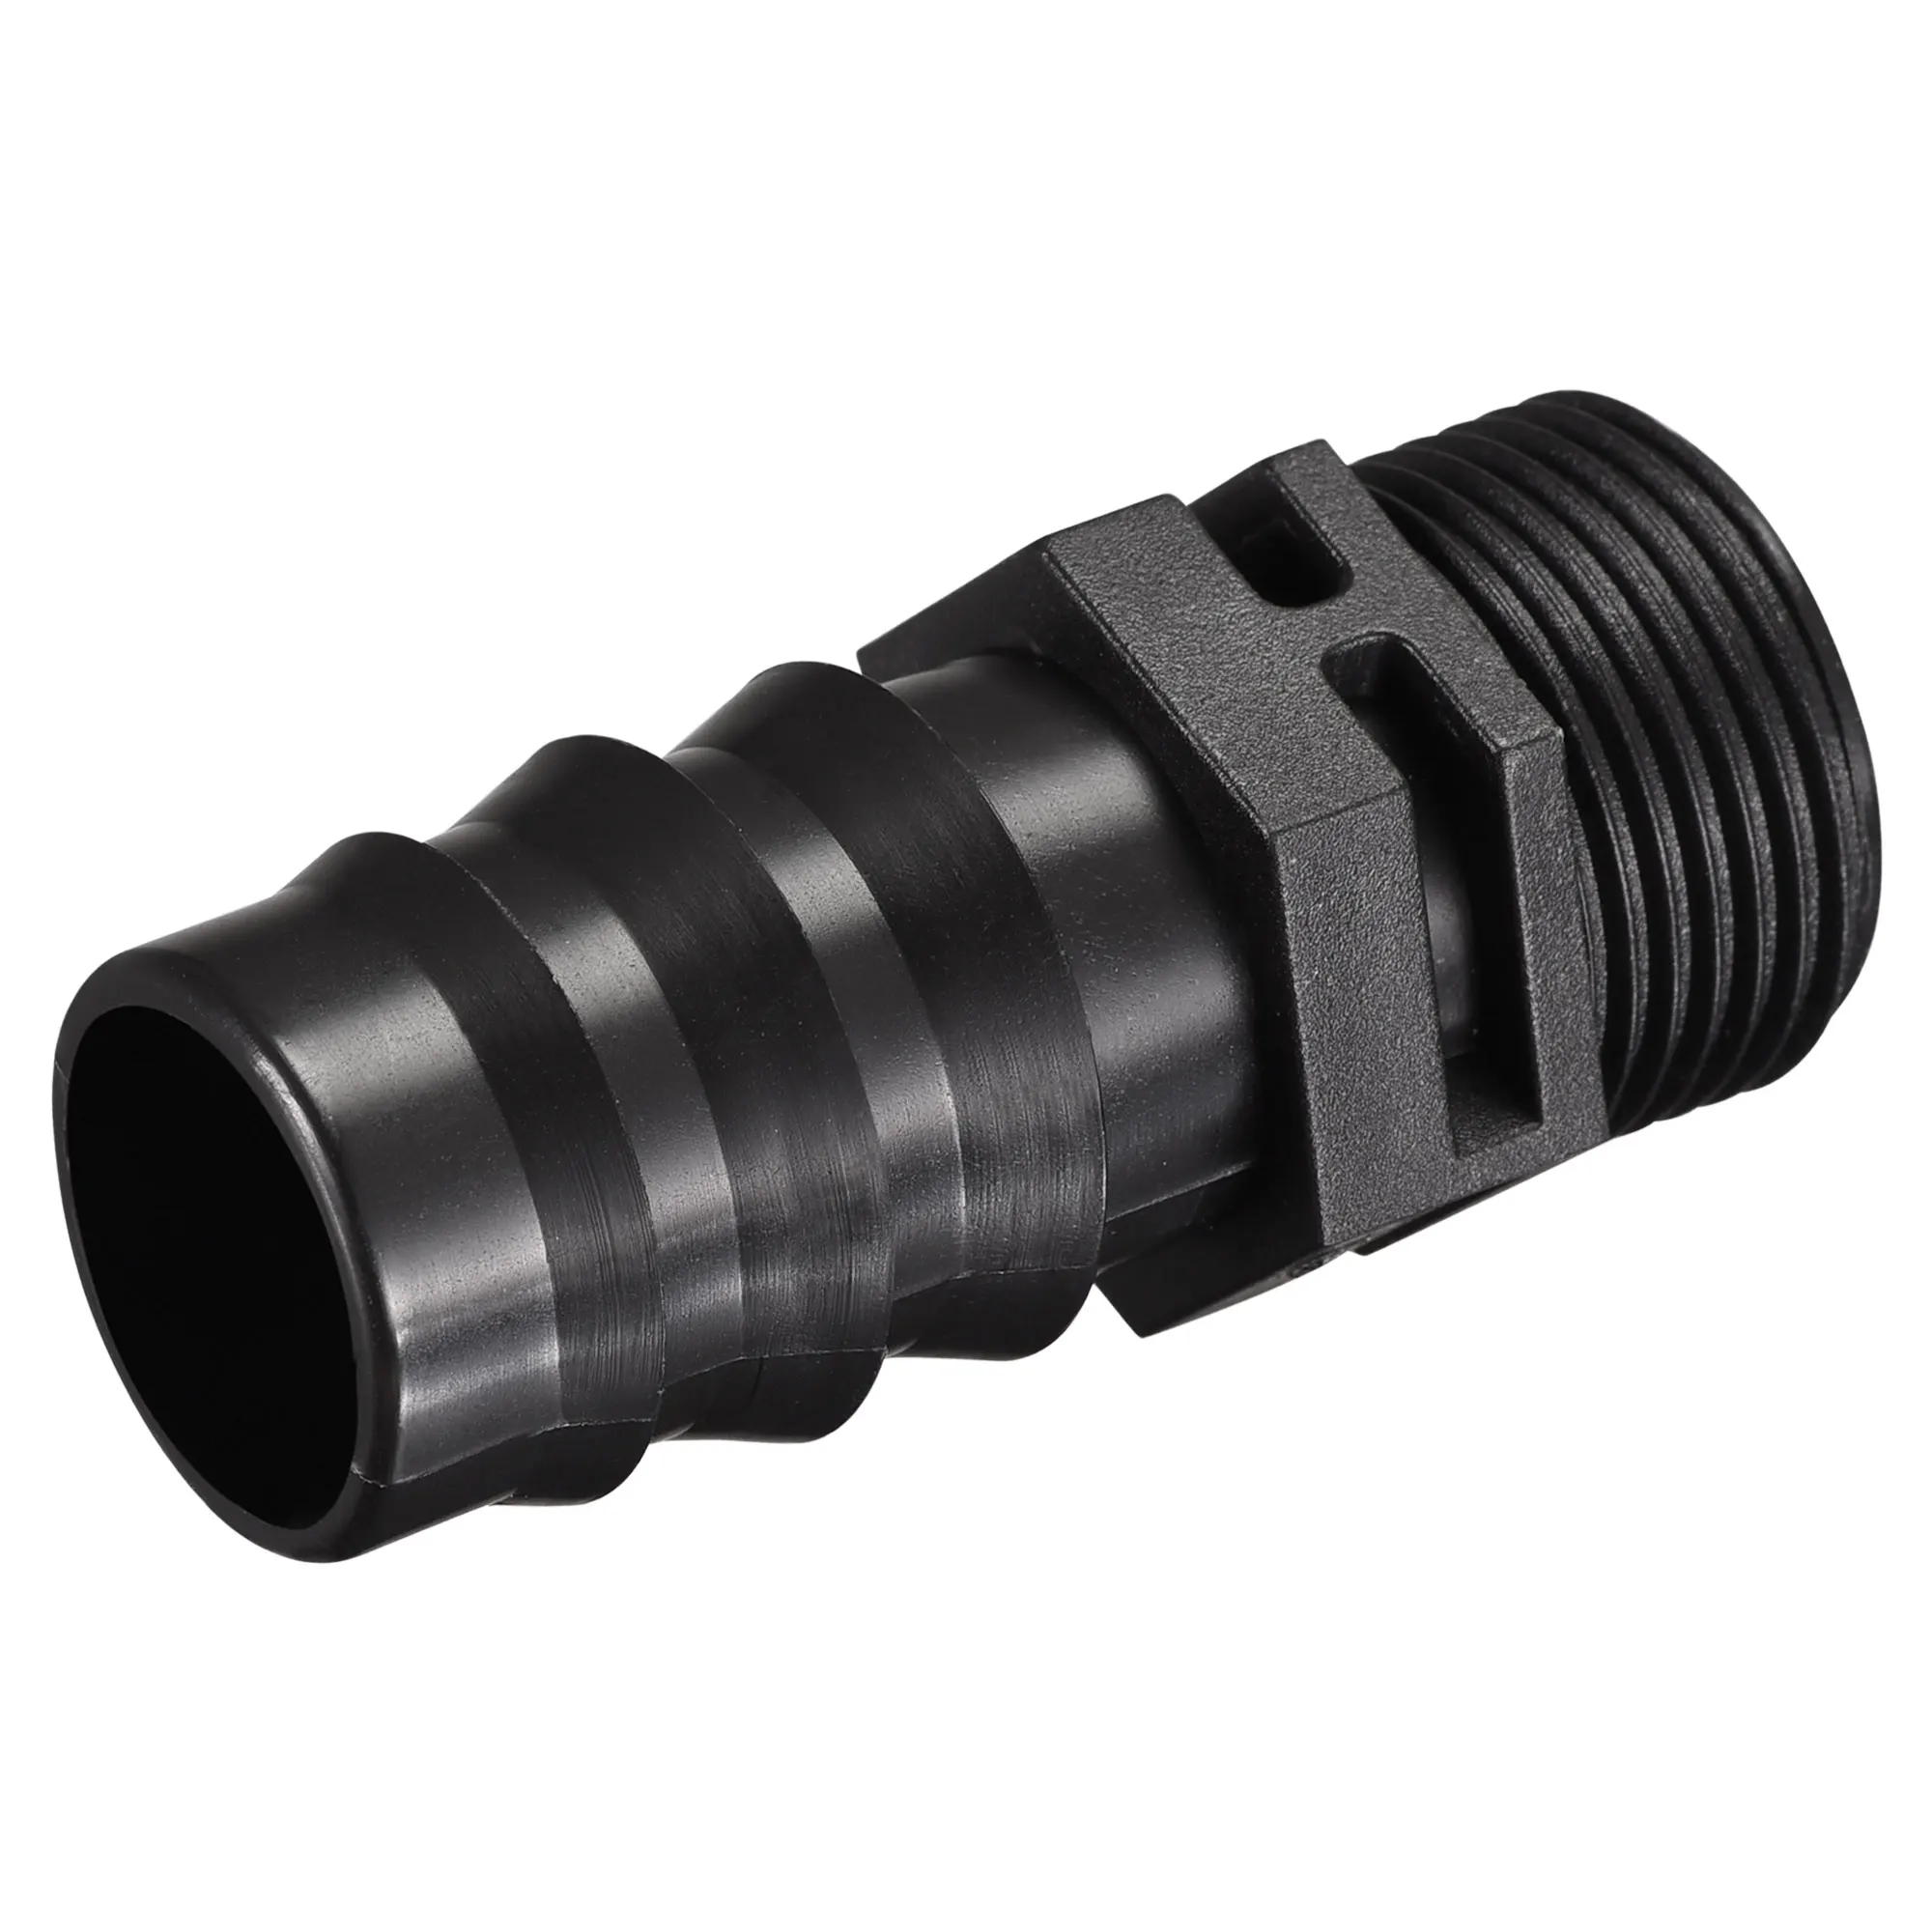 

Uxcell Barb Irrigation Fittings 25mm Barbed to G3/4 Male Thread Plastic for 1 Inch Inner Dia Hose Black 8 Pcs